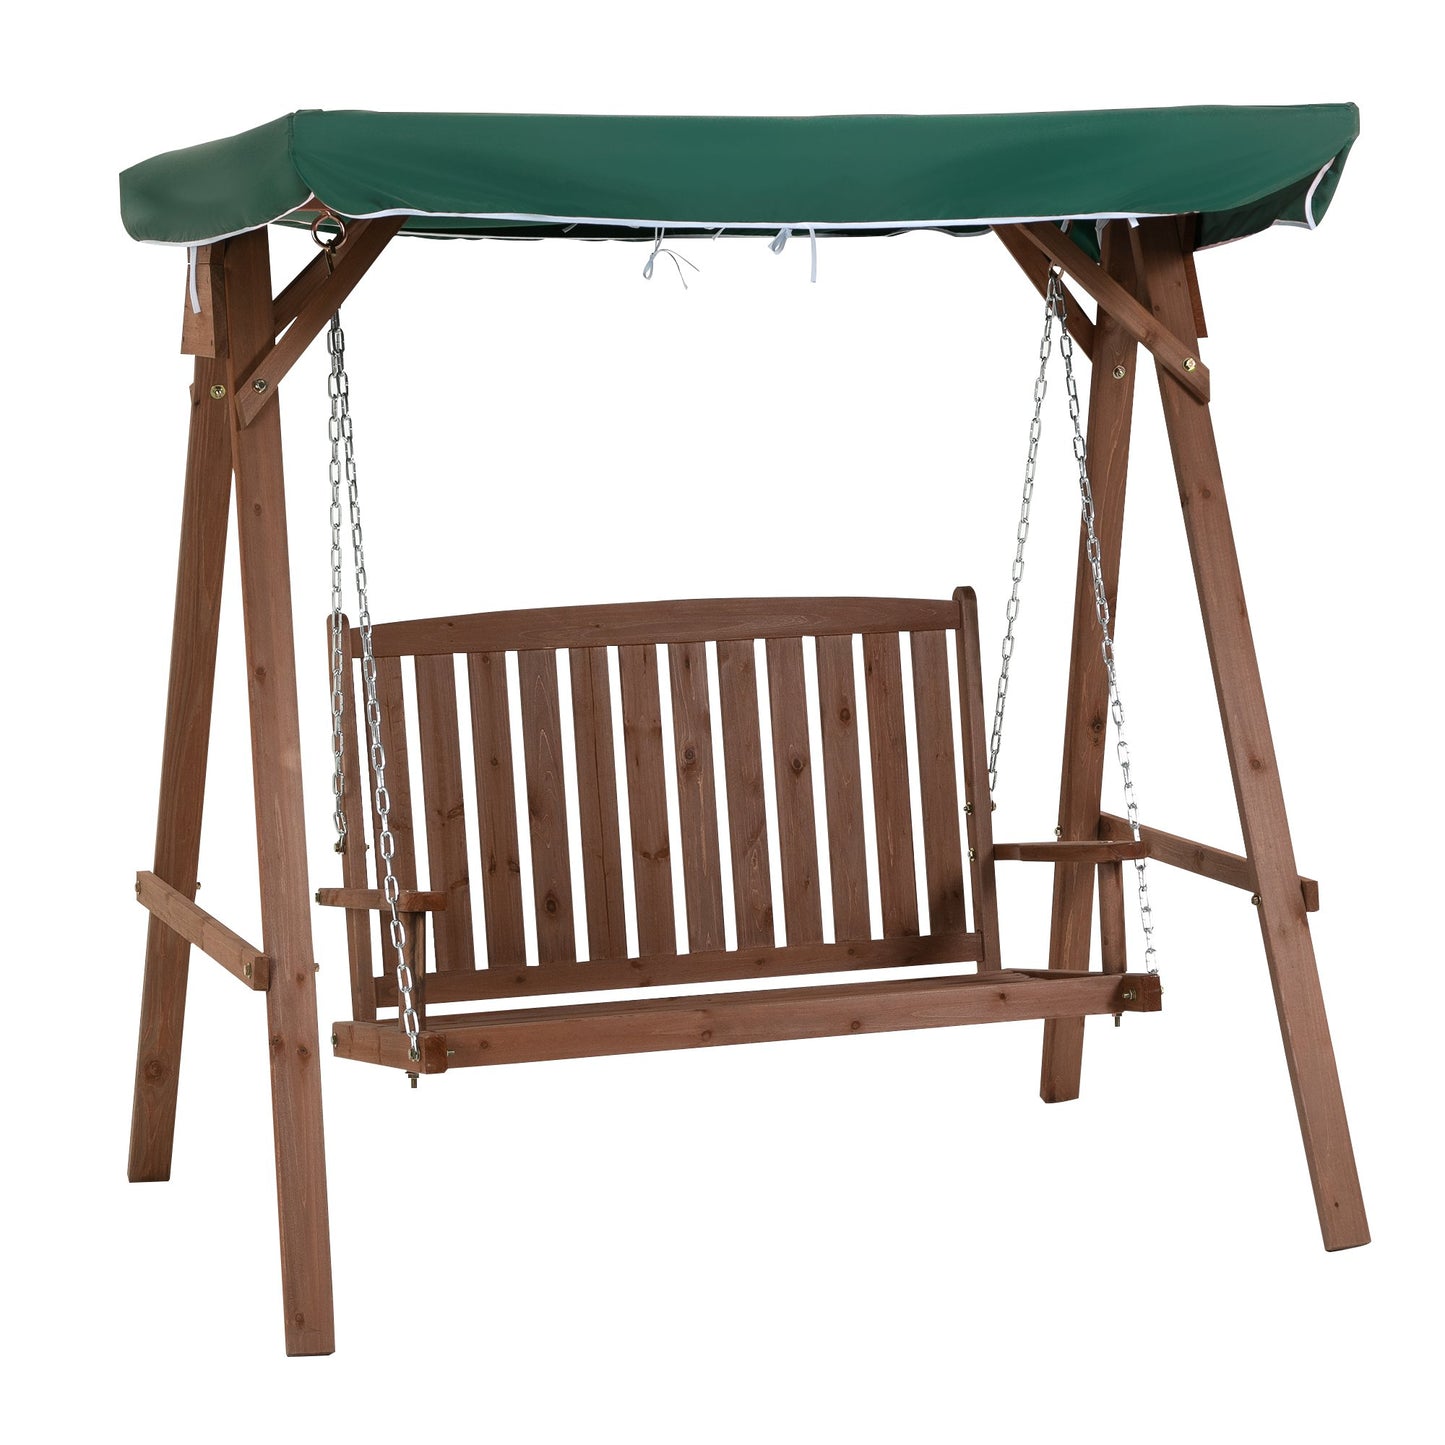 Outsunny Fir Wood 2-Seater Outdoor Garden Swing Chair w/ Canopy Green